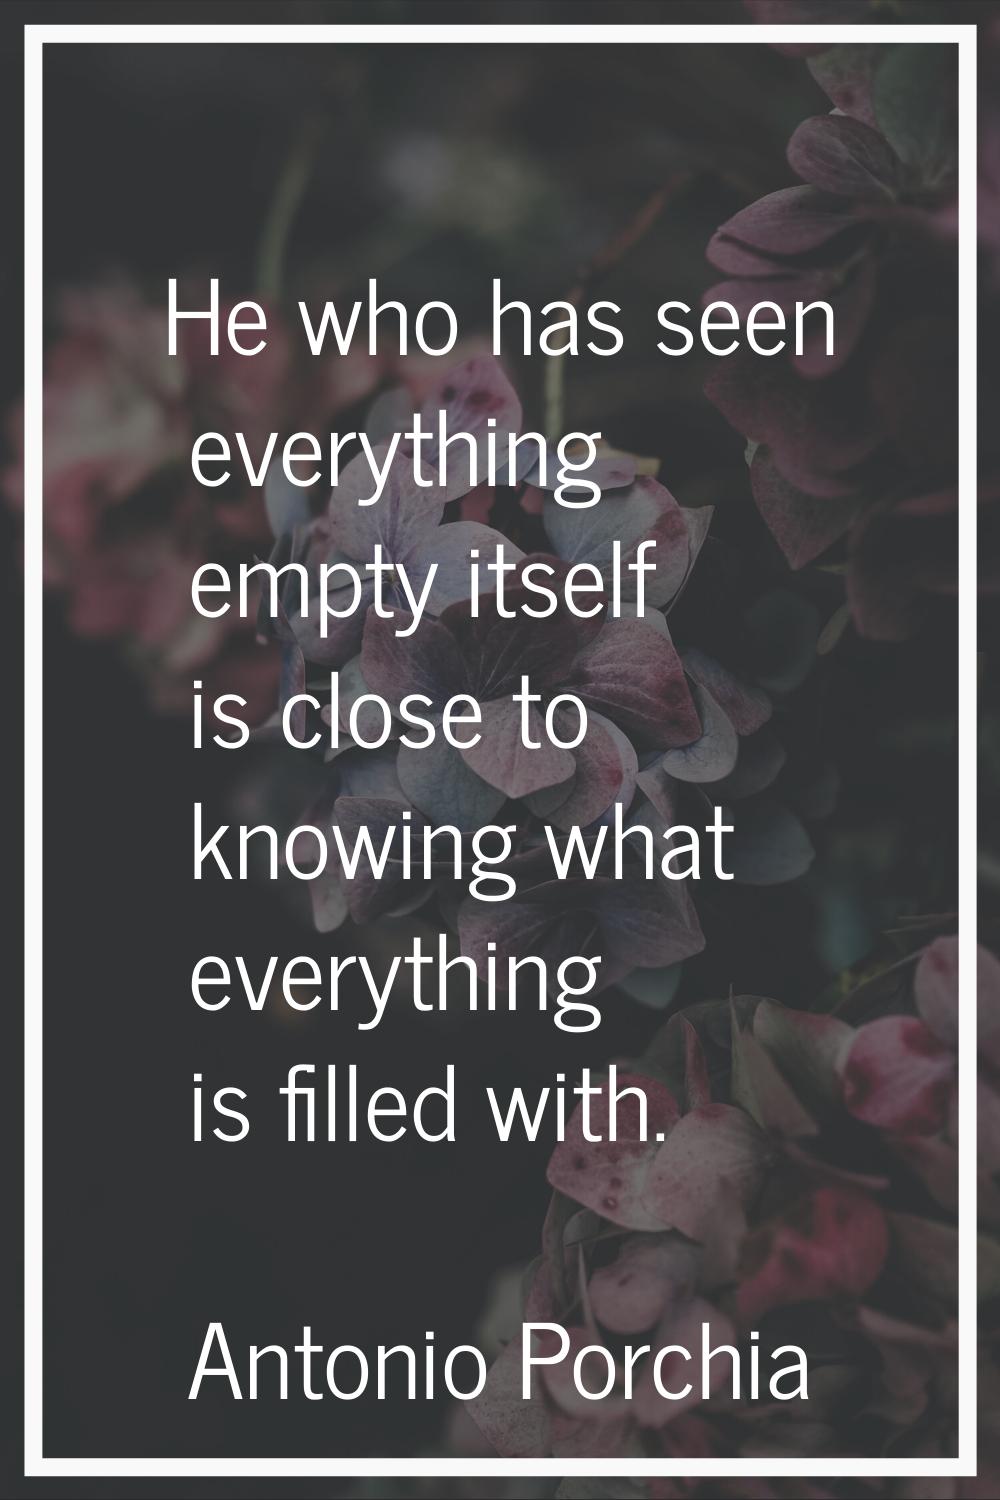 He who has seen everything empty itself is close to knowing what everything is filled with.